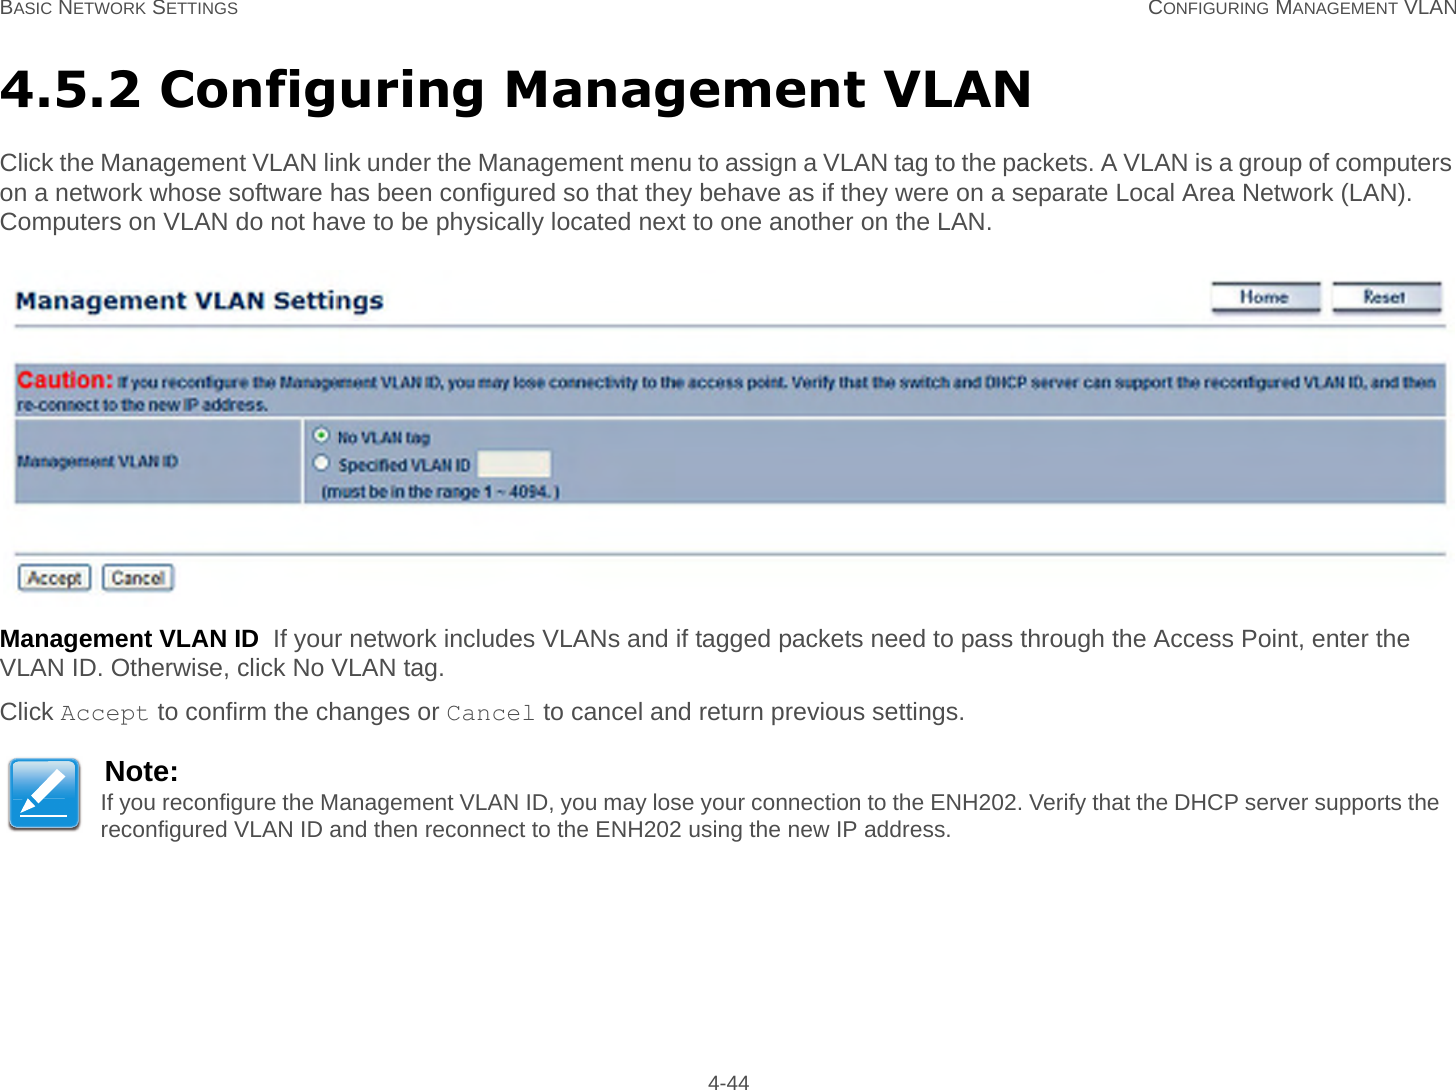 BASIC NETWORK SETTINGS CONFIGURING MANAGEMENT VLAN 4-444.5.2 Configuring Management VLANClick the Management VLAN link under the Management menu to assign a VLAN tag to the packets. A VLAN is a group of computers on a network whose software has been configured so that they behave as if they were on a separate Local Area Network (LAN). Computers on VLAN do not have to be physically located next to one another on the LAN.Management VLAN ID  If your network includes VLANs and if tagged packets need to pass through the Access Point, enter the VLAN ID. Otherwise, click No VLAN tag.Click Accept to confirm the changes or Cancel to cancel and return previous settings.Note:If you reconfigure the Management VLAN ID, you may lose your connection to the ENH202. Verify that the DHCP server supports the reconfigured VLAN ID and then reconnect to the ENH202 using the new IP address.